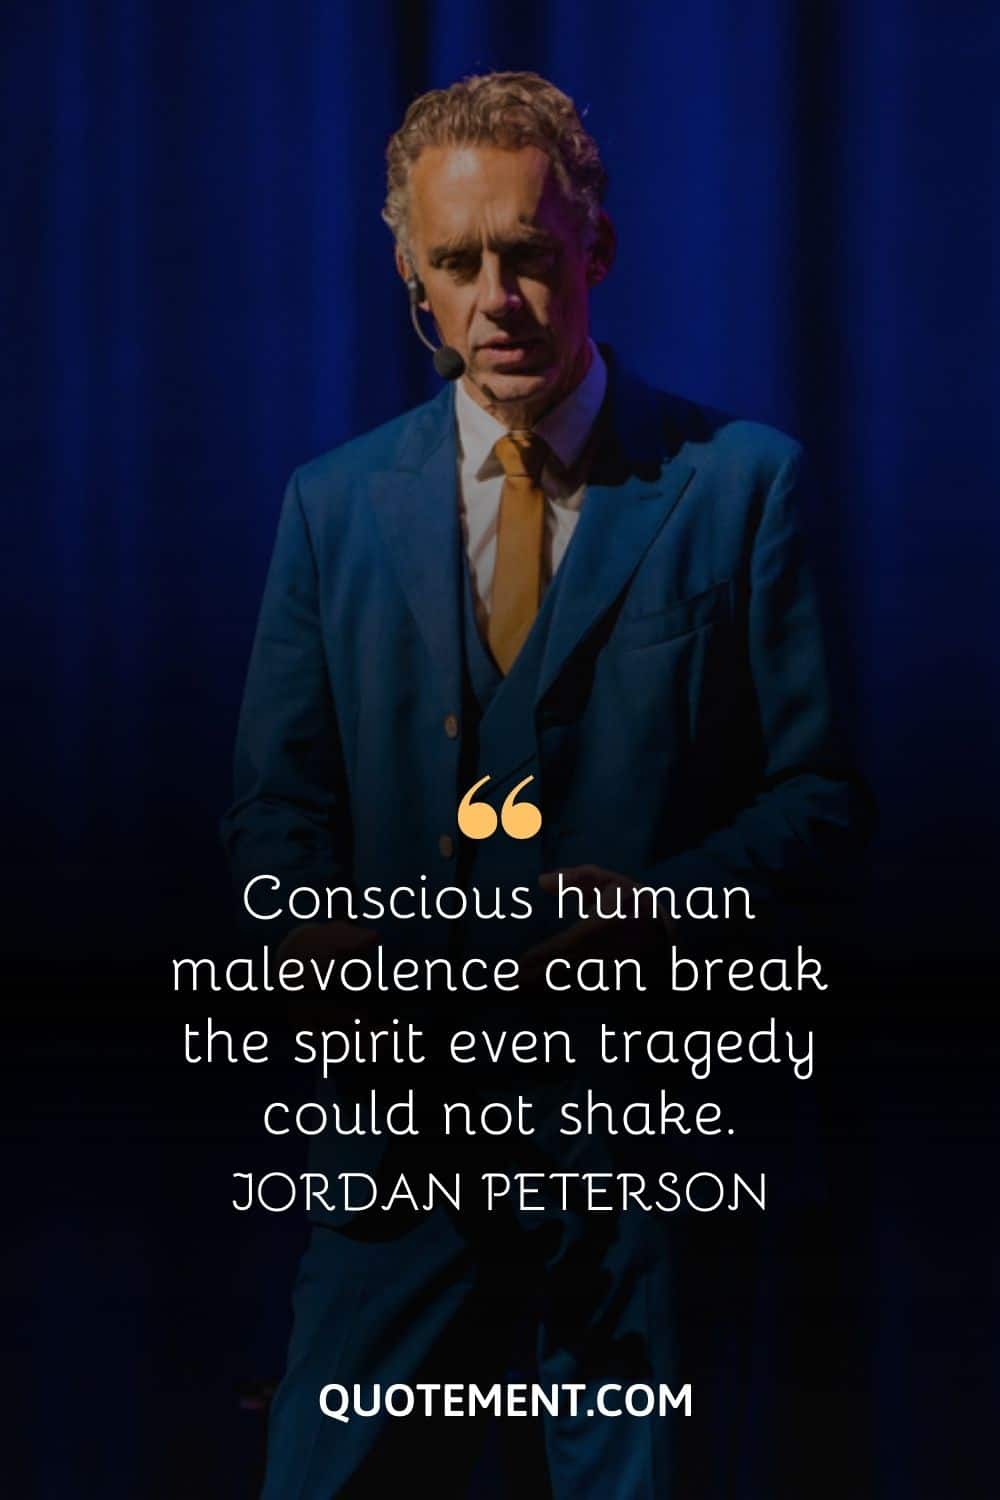 “Conscious human malevolence can break the spirit even tragedy could not shake.” — Jordan Peterson